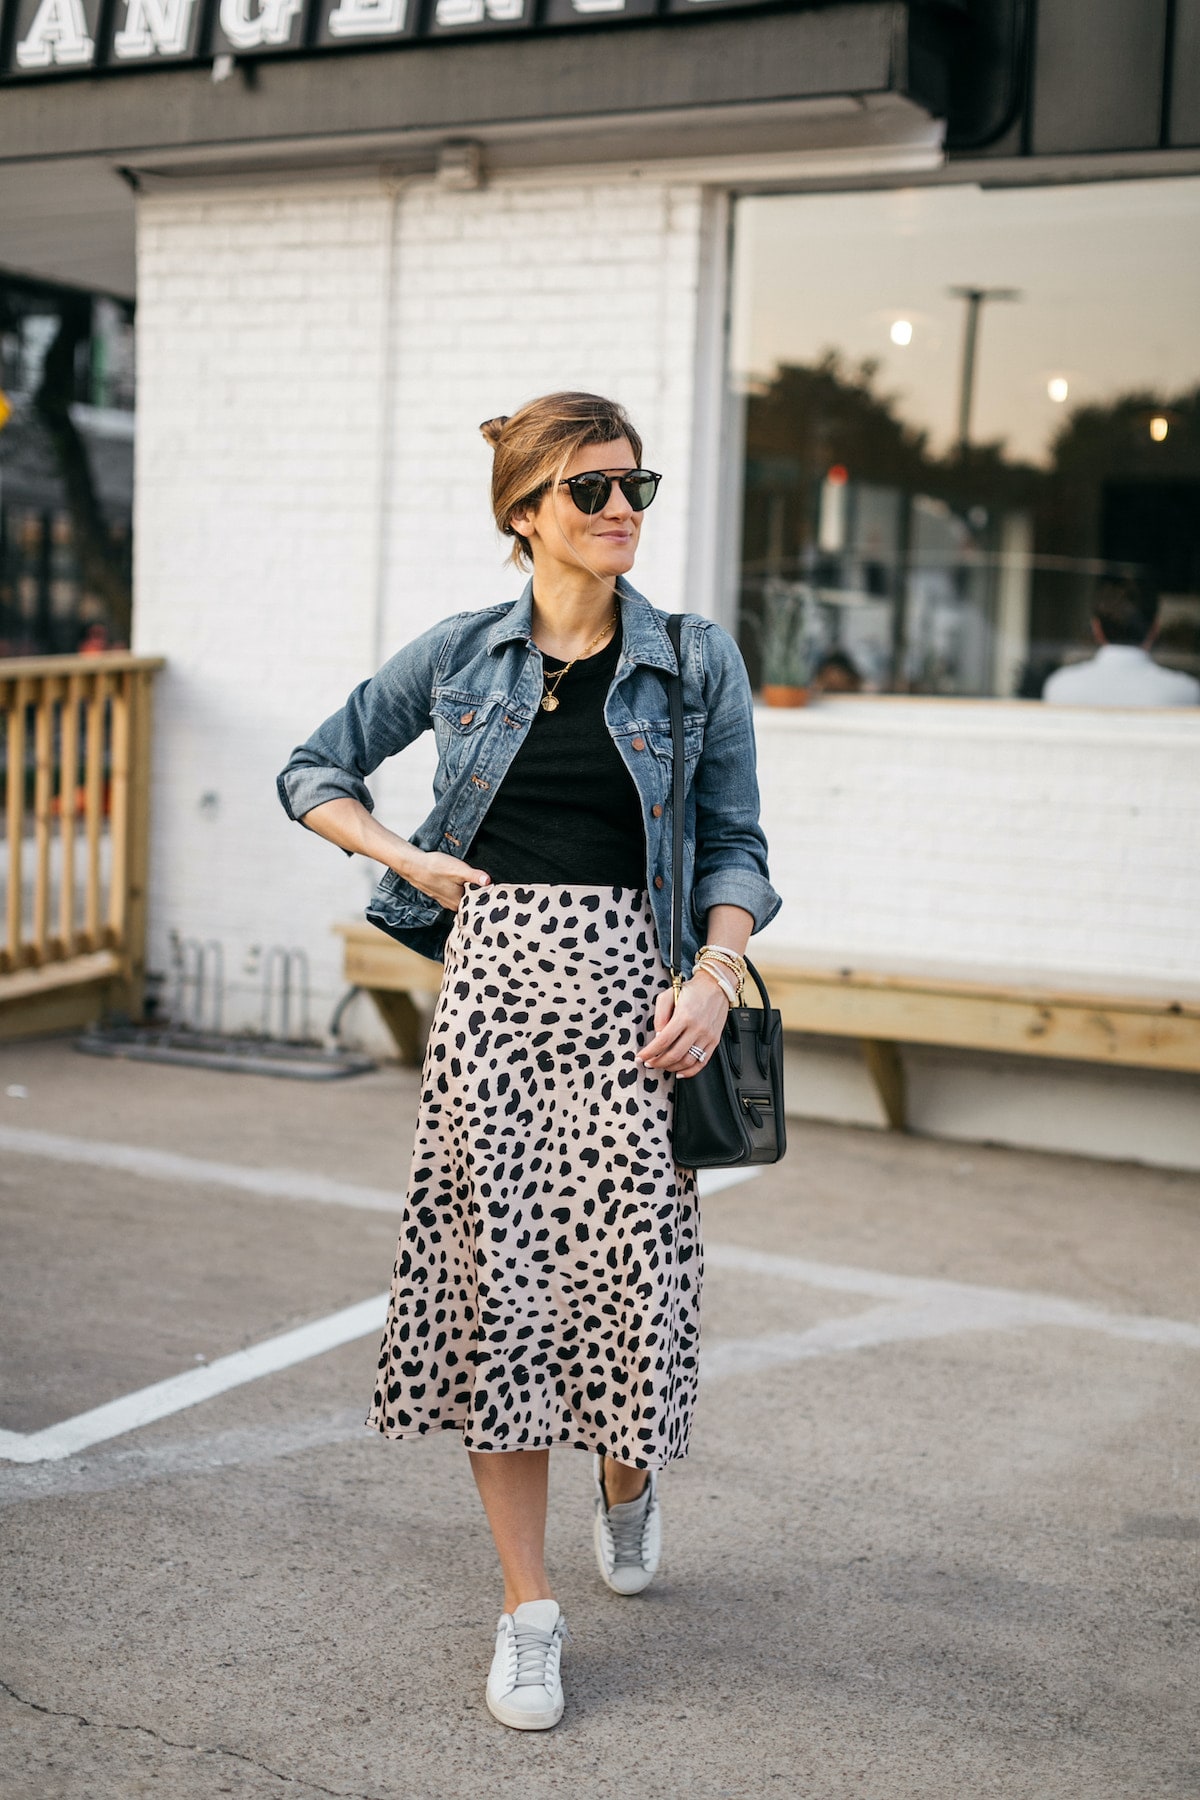 Midi Skirts For Work And Office Wear Ideas 2023 | FashionTasty.com